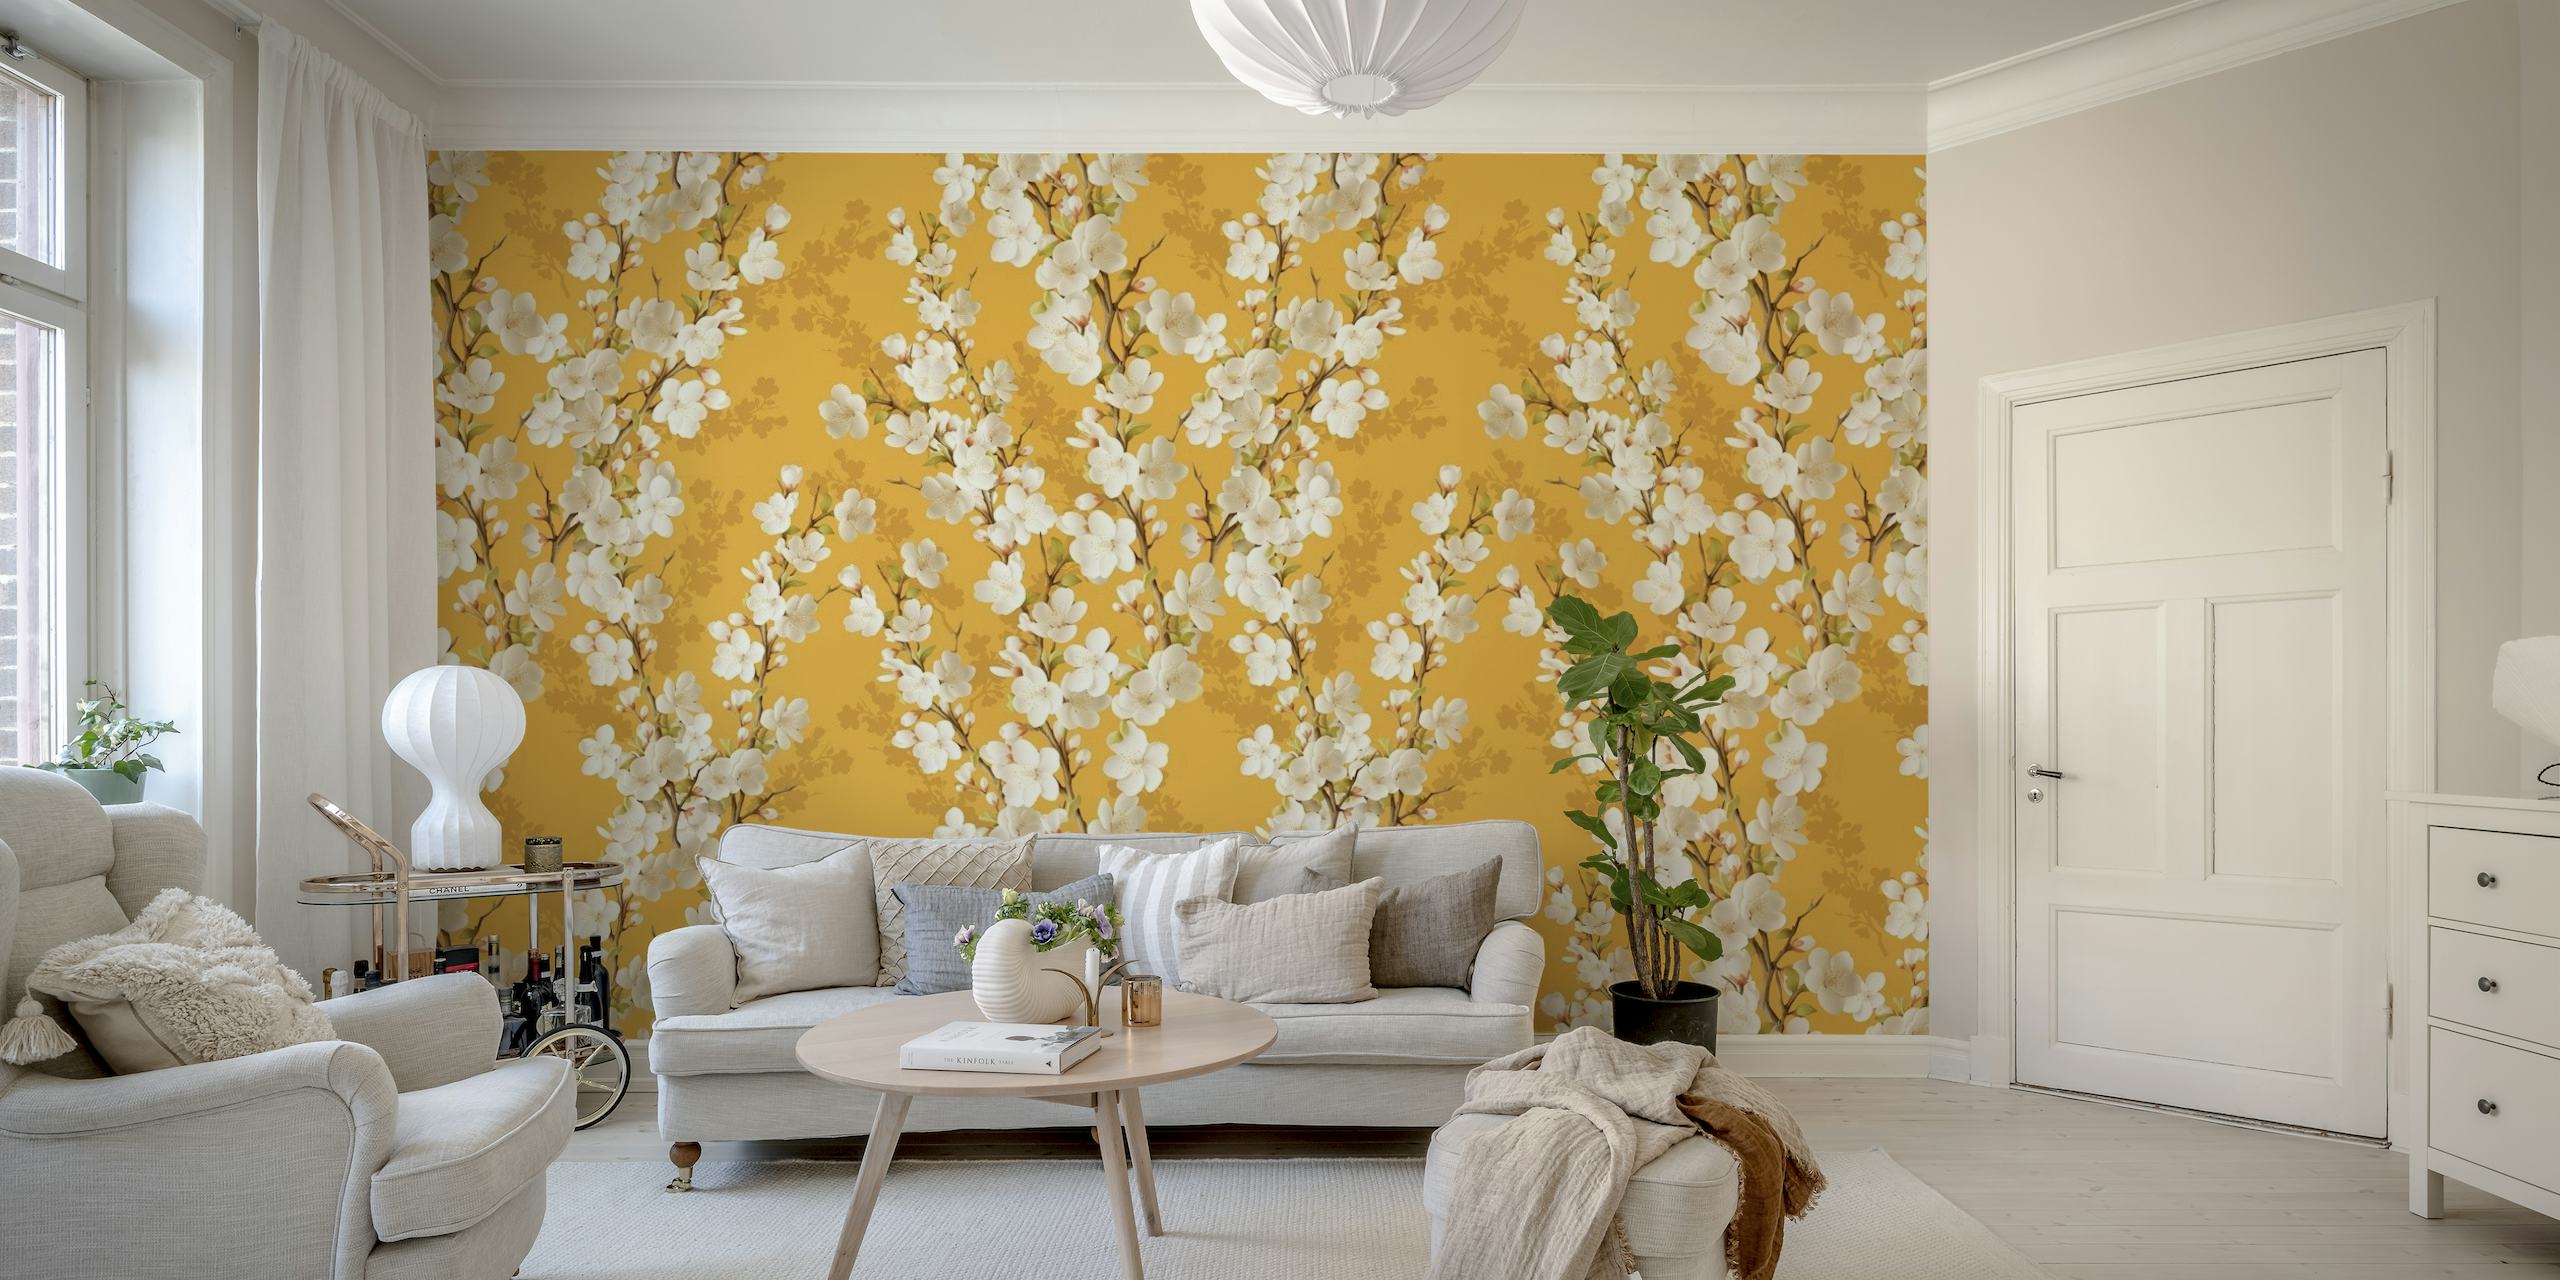 Cherry blossom indian yellow MURAL scale a ταπετσαρία